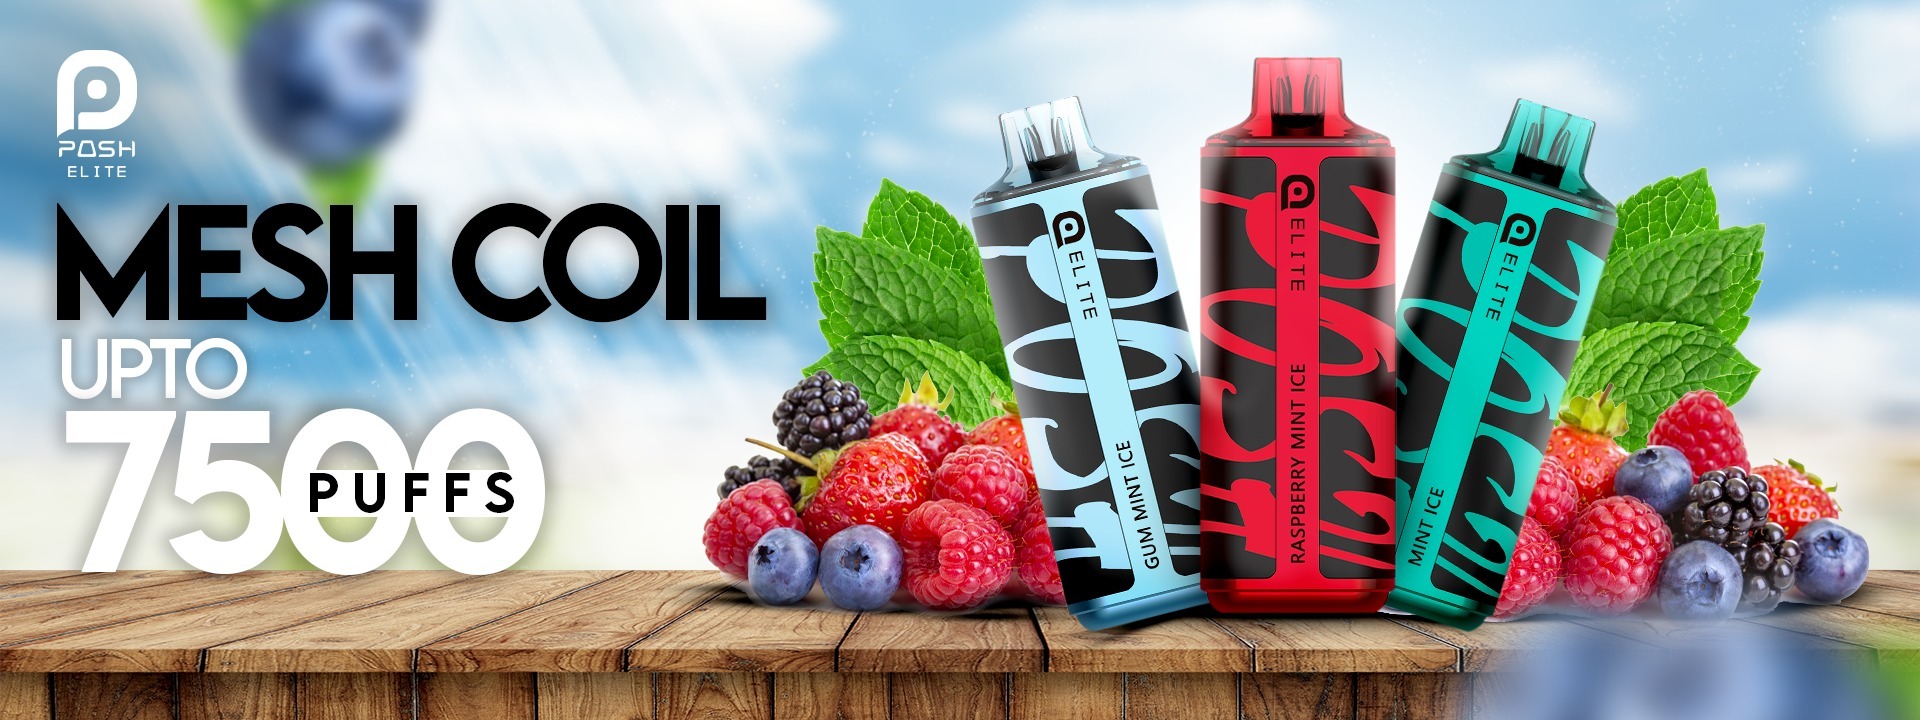 One of the standout features of the Posh Elite 7500 puffs is its mouthwatering pre-filled vape juice. Each device comes pre-loaded with a delectable e-liquid flavor